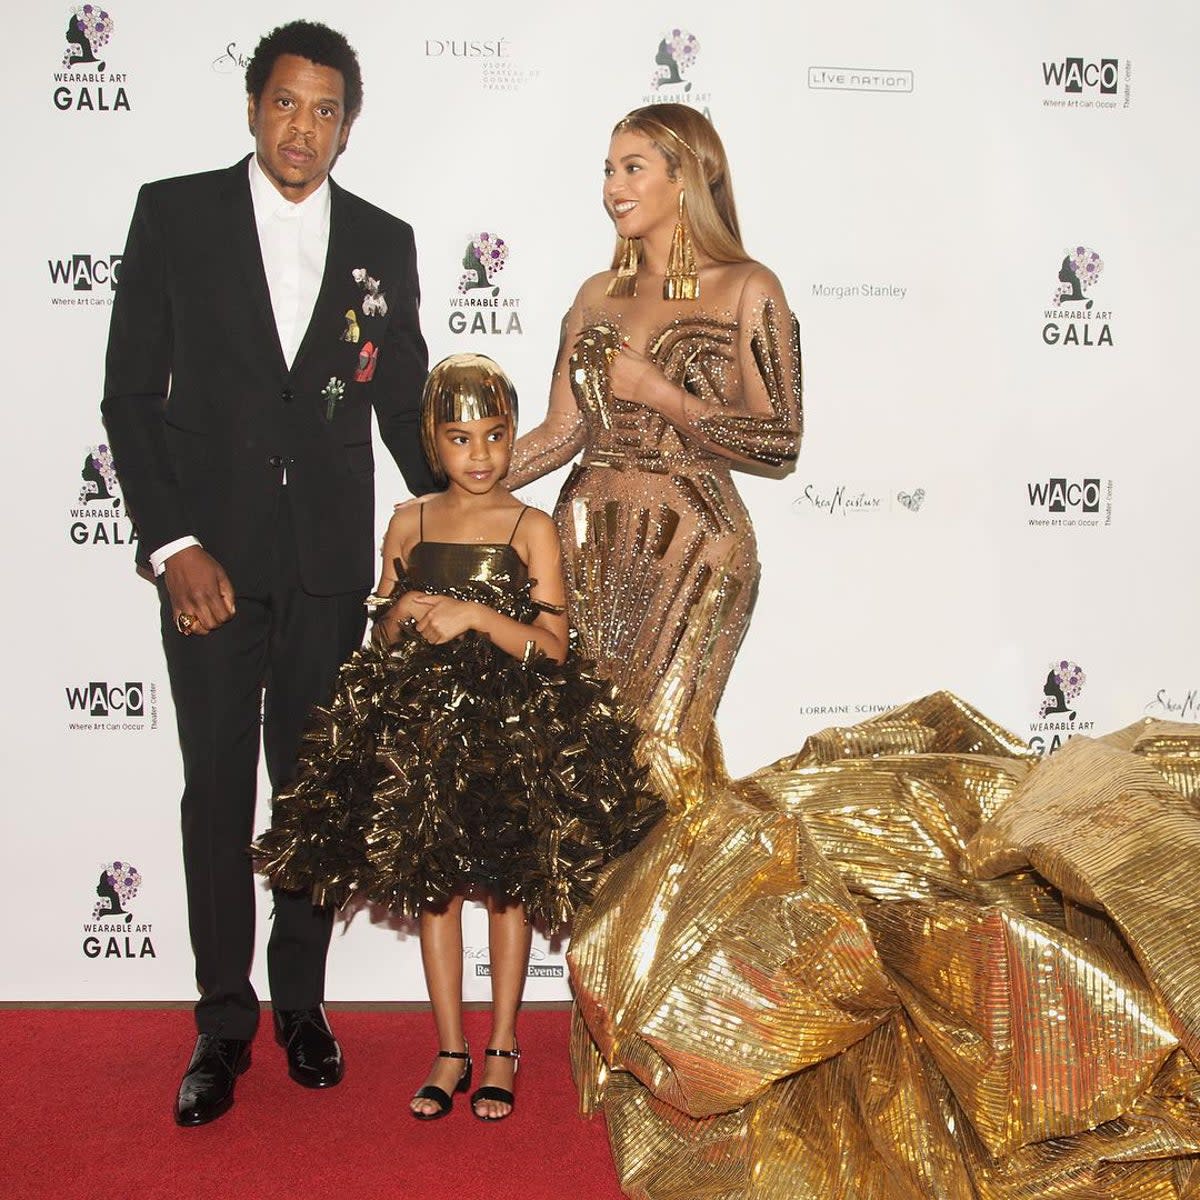 Beyoncé and Blue Ivy Carter stole the show at the 2nd Annual Wearable Art Gala in Los Angeles (Beyonce/Instagram)